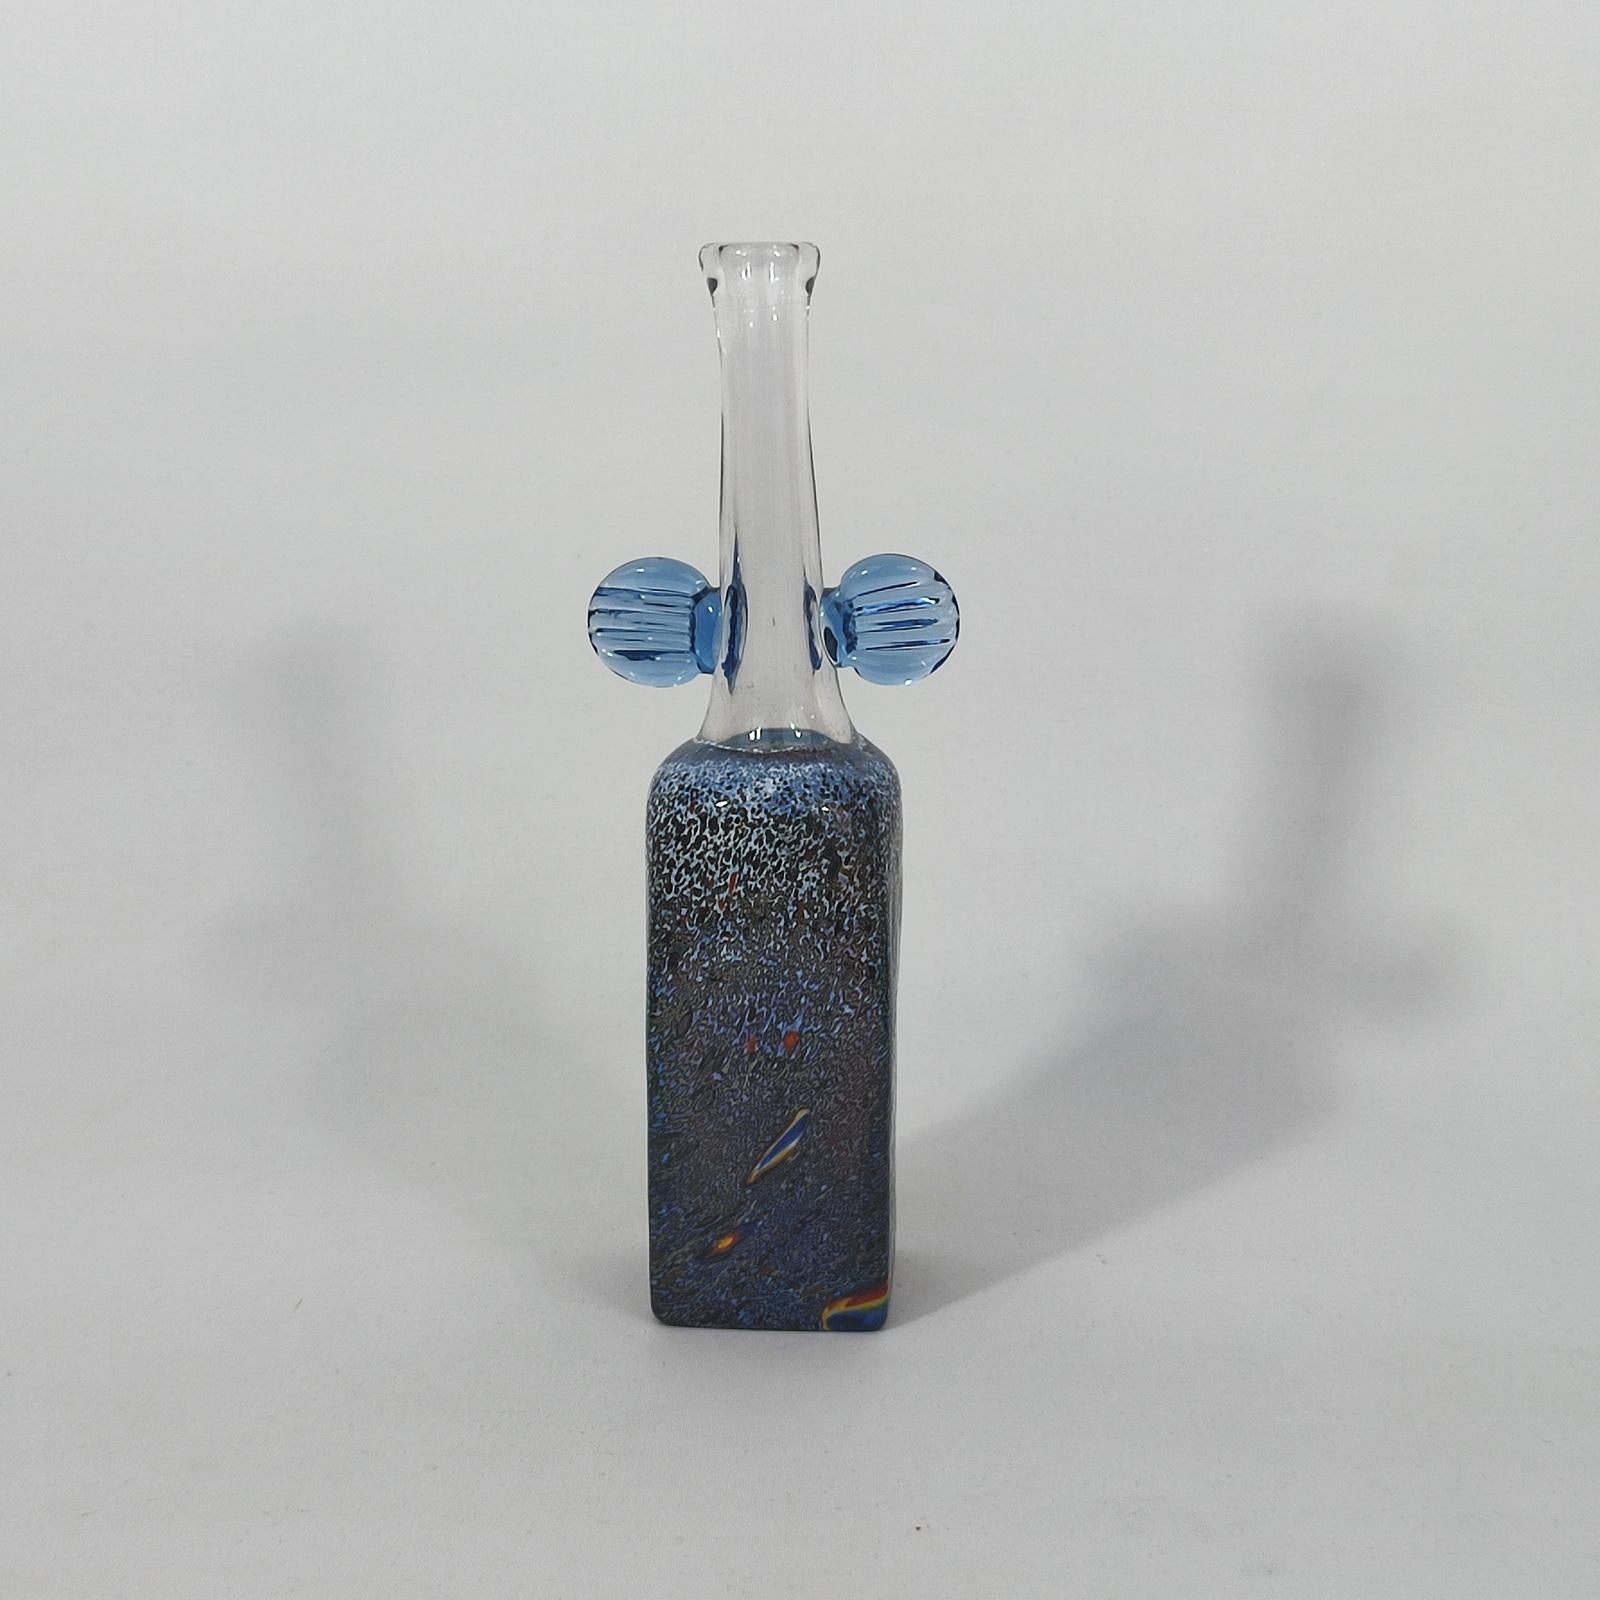 Very rare Bertil Vallien Atelje glass vase, Sweden, 1970s
Early vase designed by Bertil Vallien and made at the Boda factory in the 1970s. The vase is squared shape, with beautiful luster to the bottom, clear glass neck with two blue applied wings.